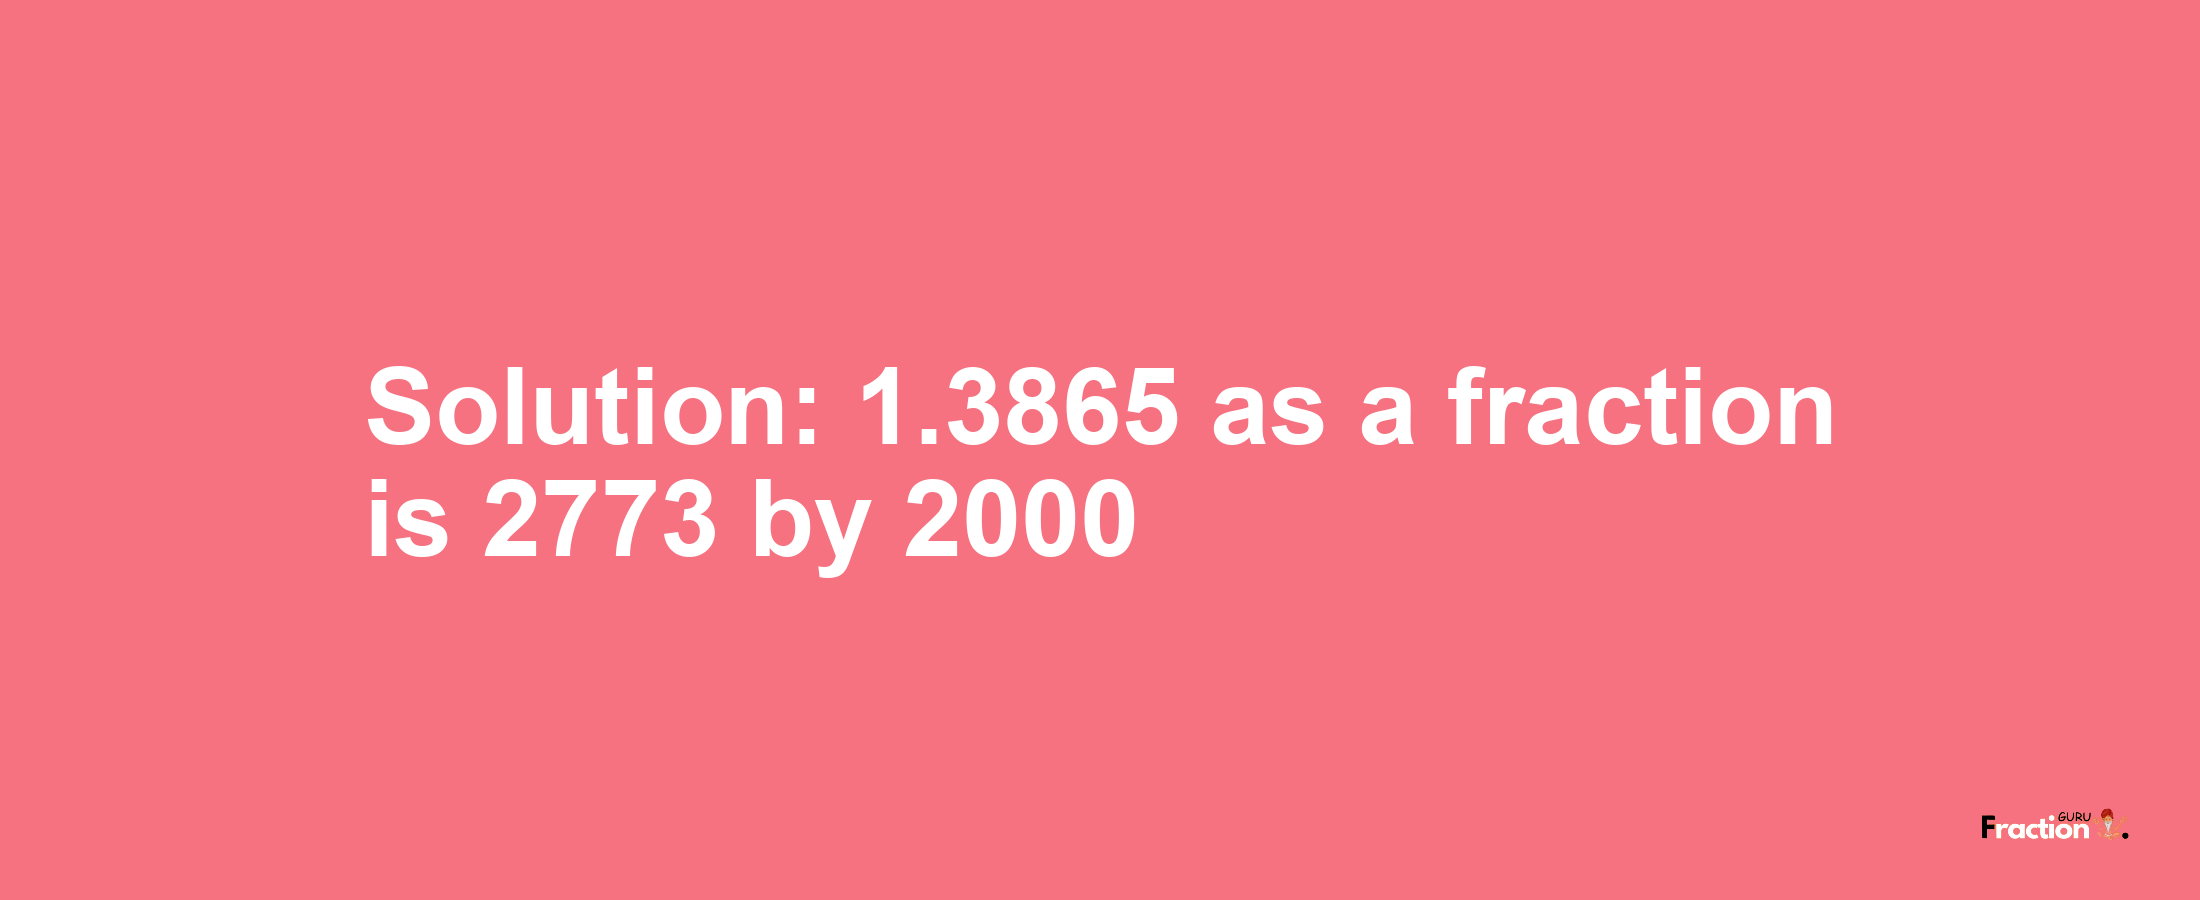 Solution:1.3865 as a fraction is 2773/2000